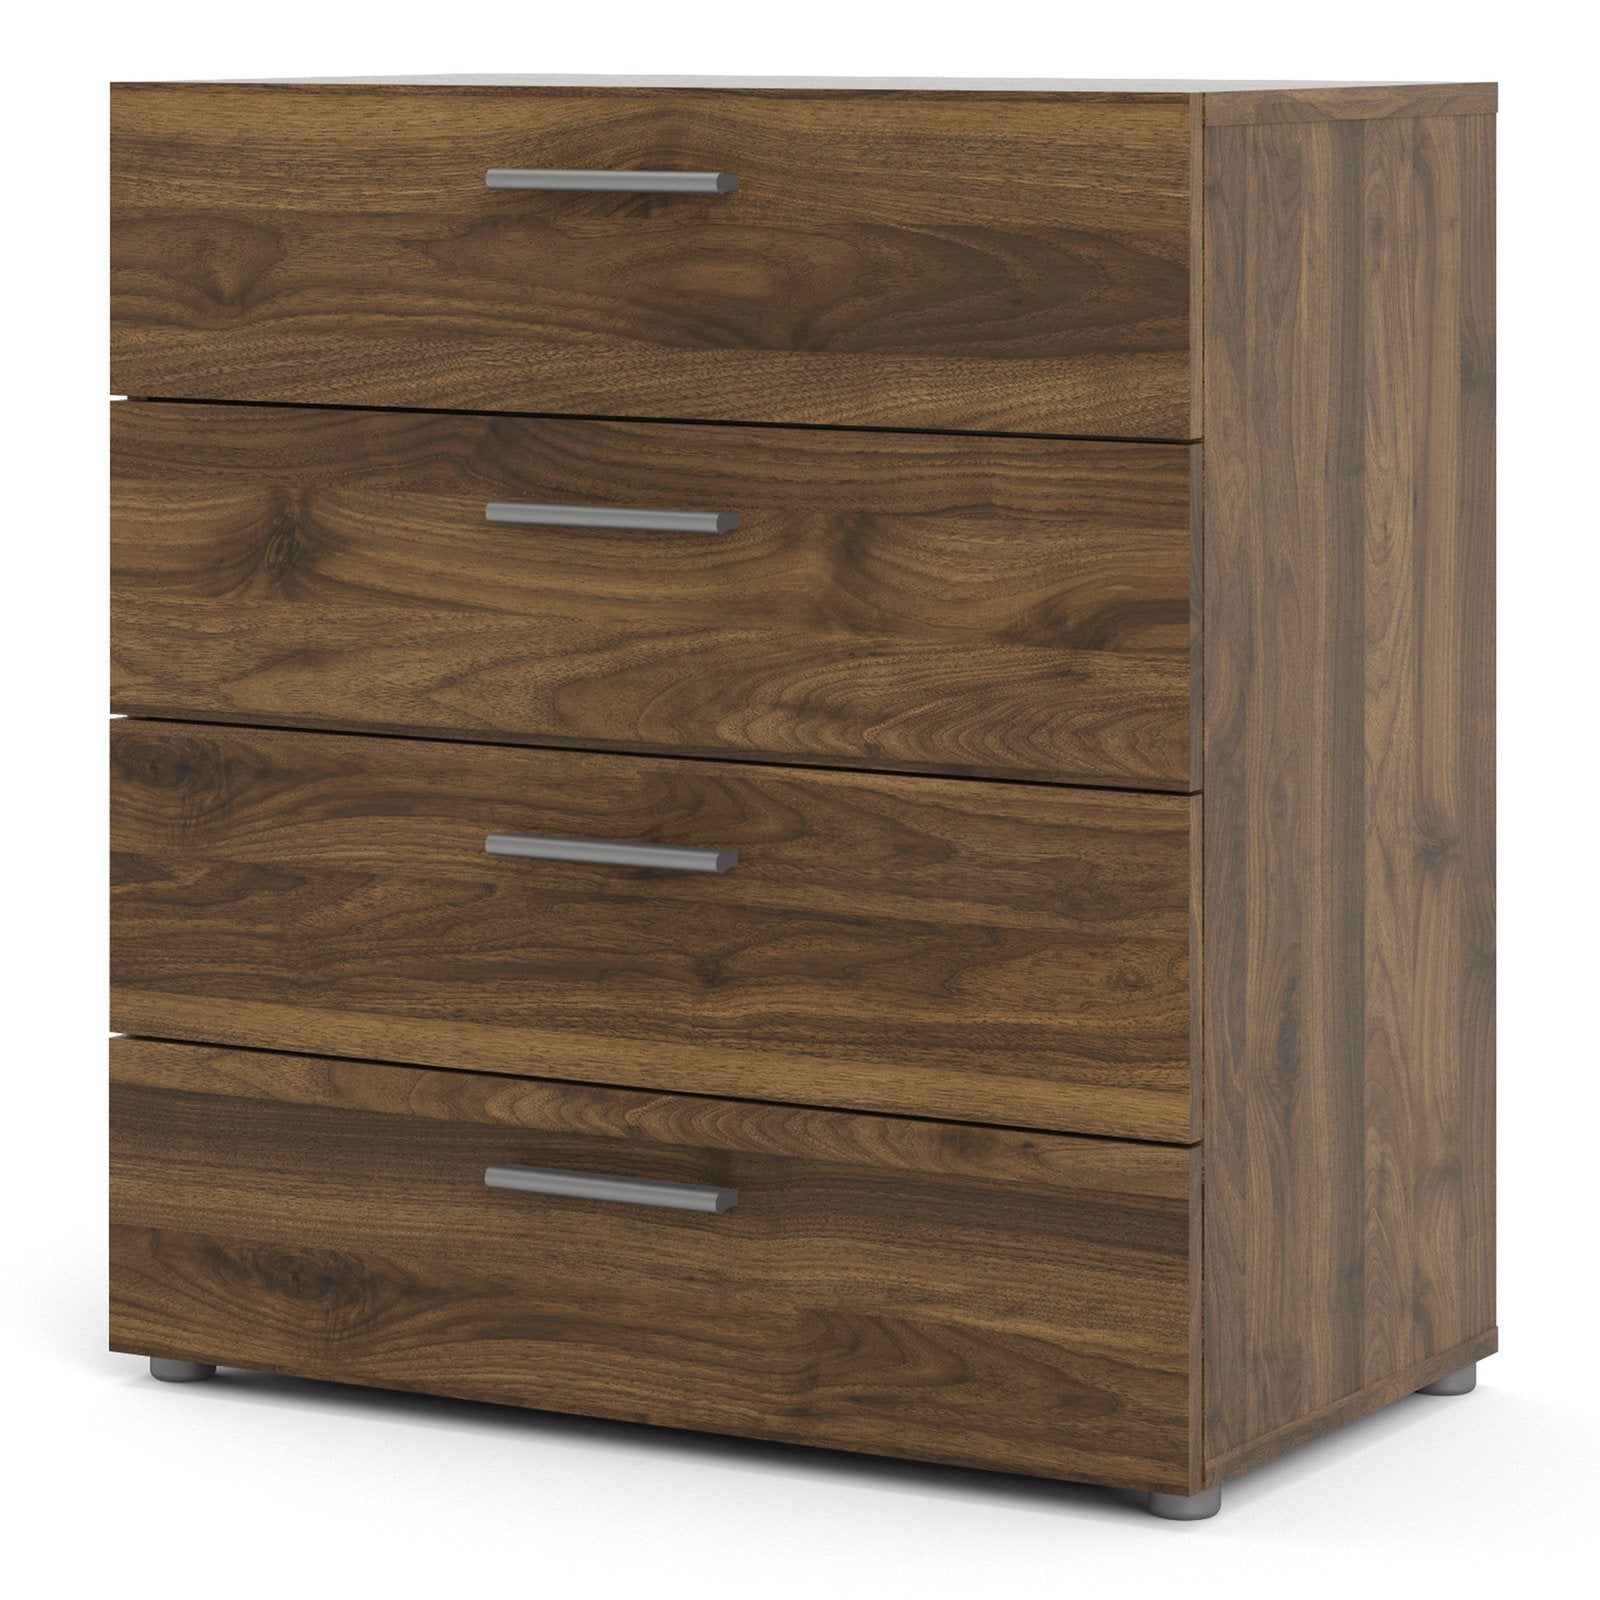 Pepe Chest of 4 Drawers